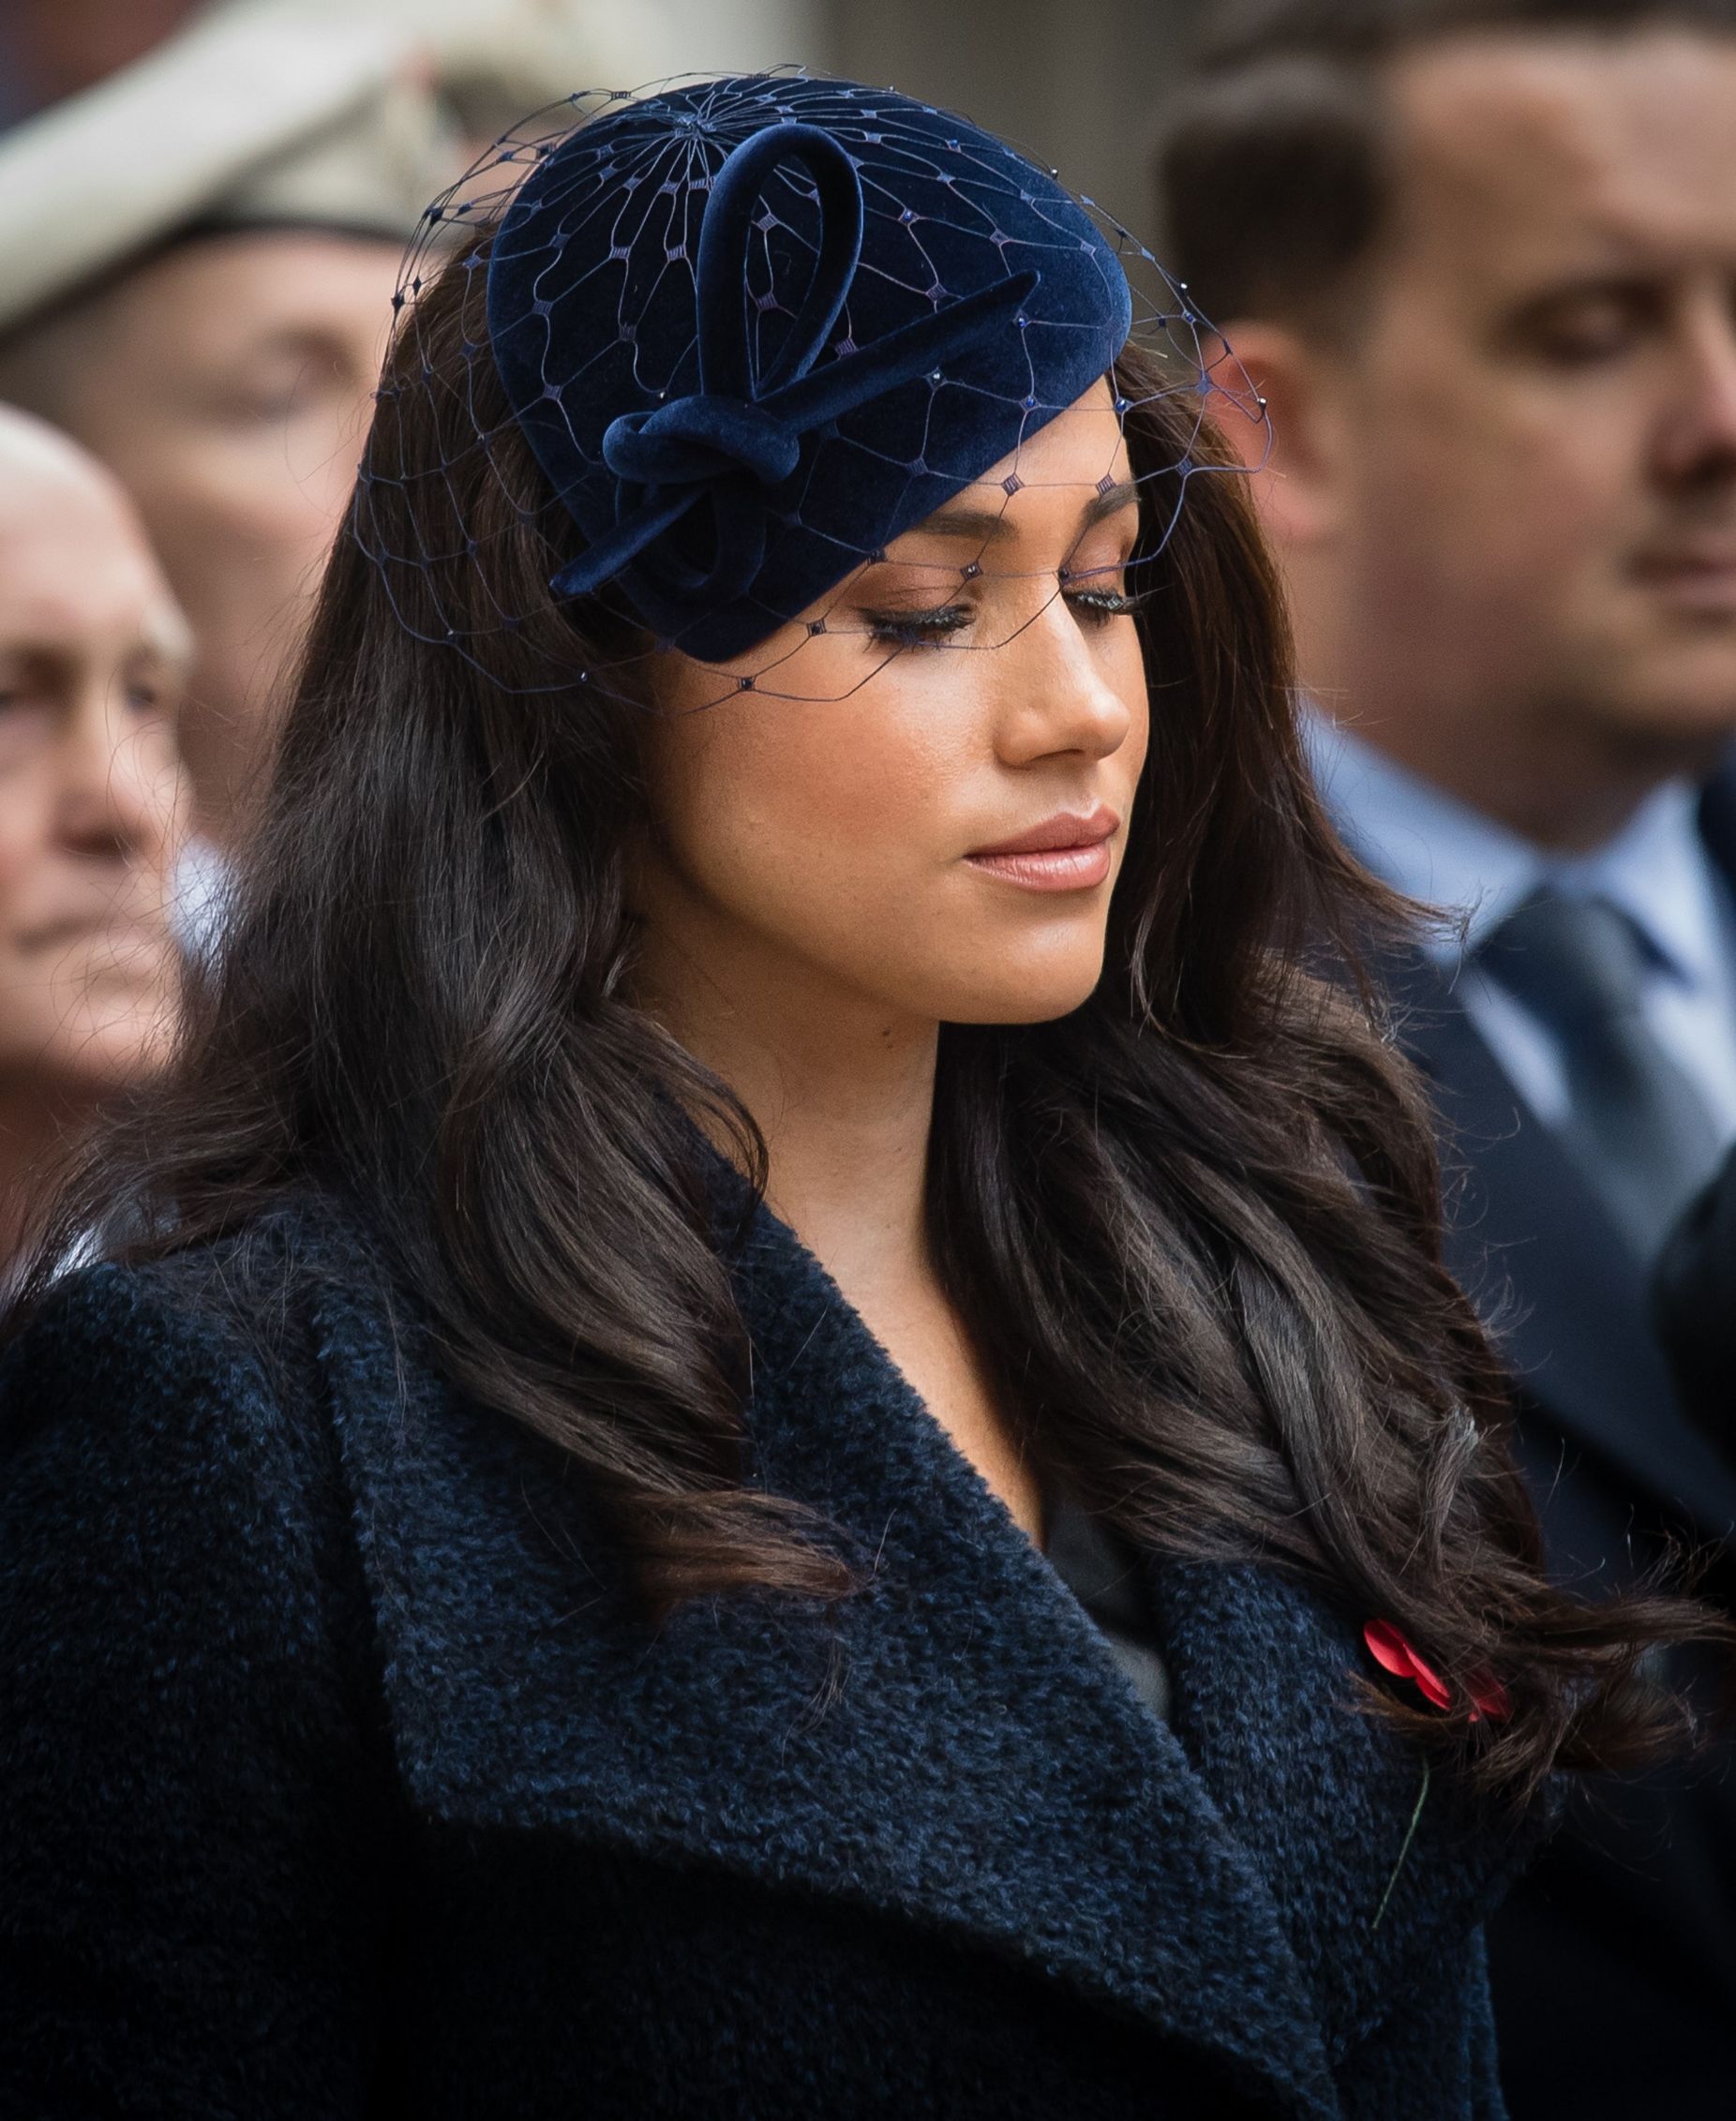 Dior denies the contract of Meghan Markle